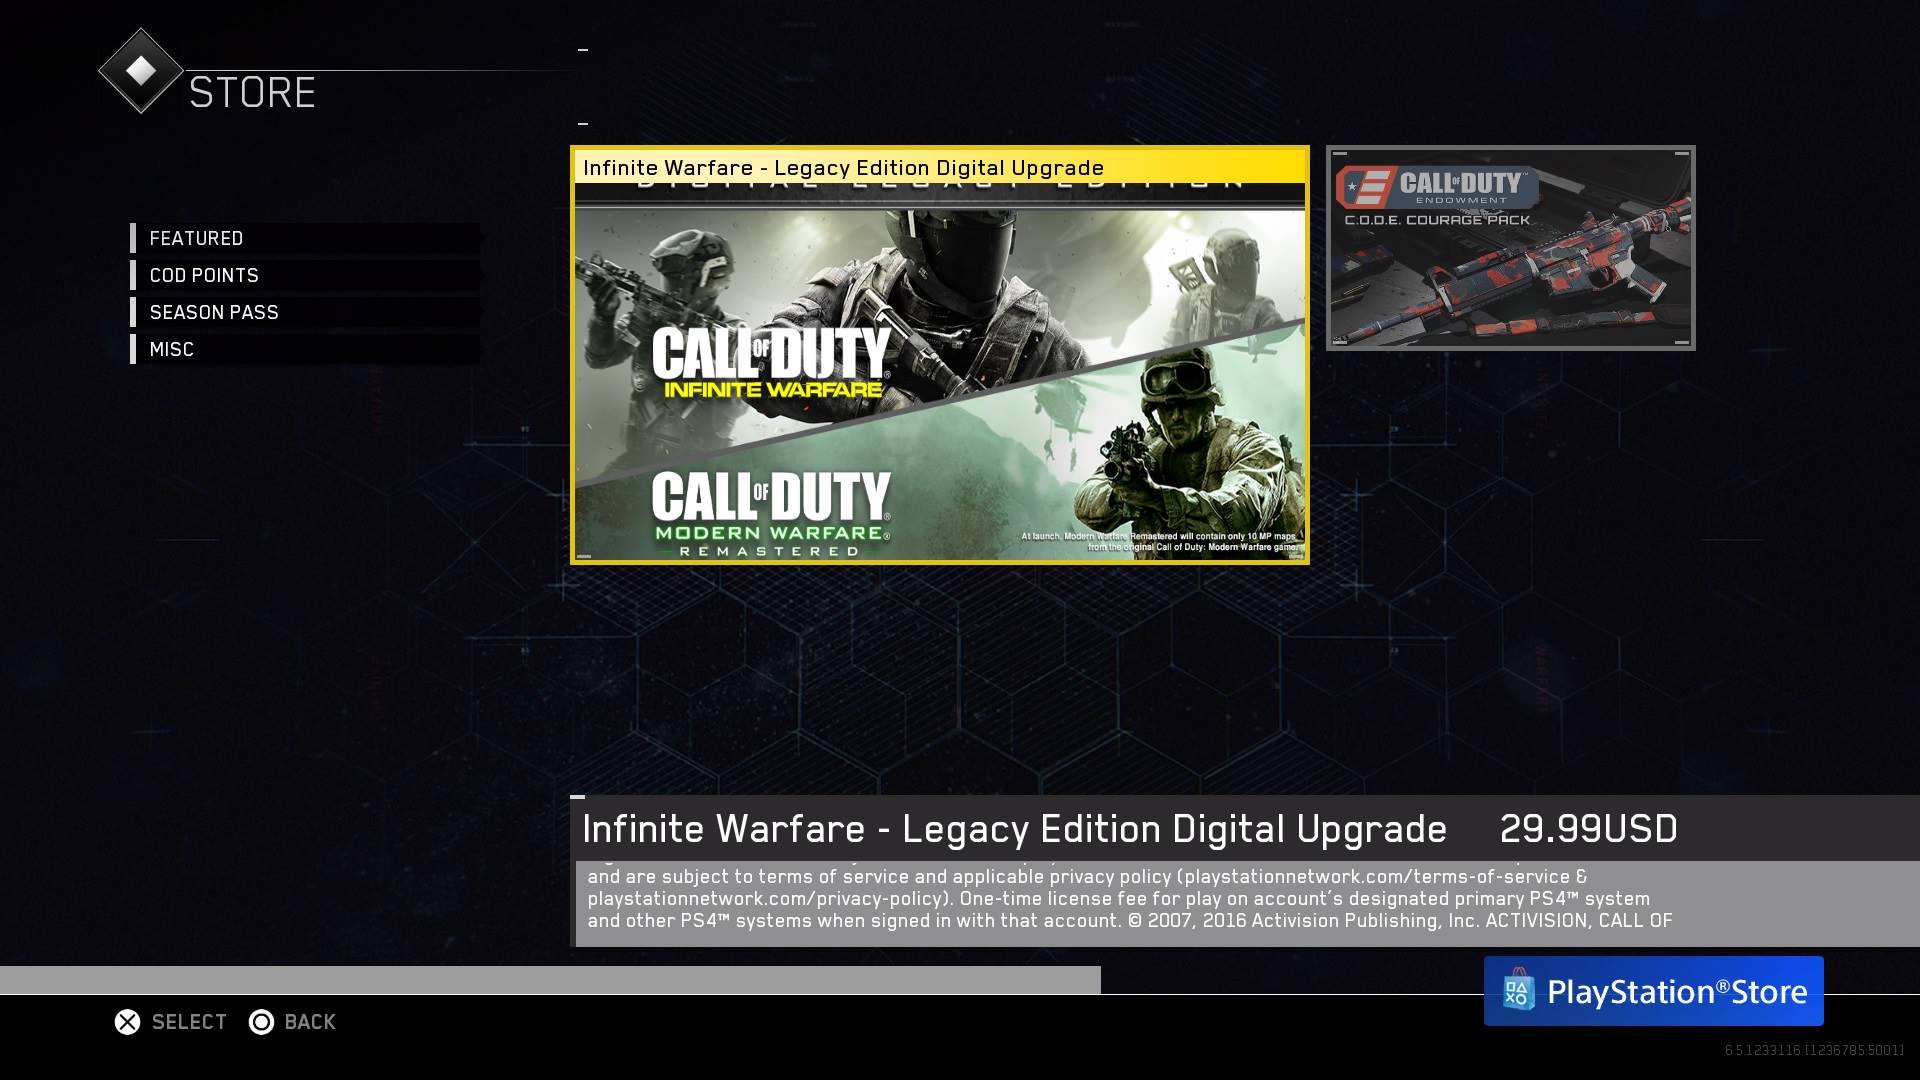 Any advice? Bought Xbox infinite warfare legacy edition but modern